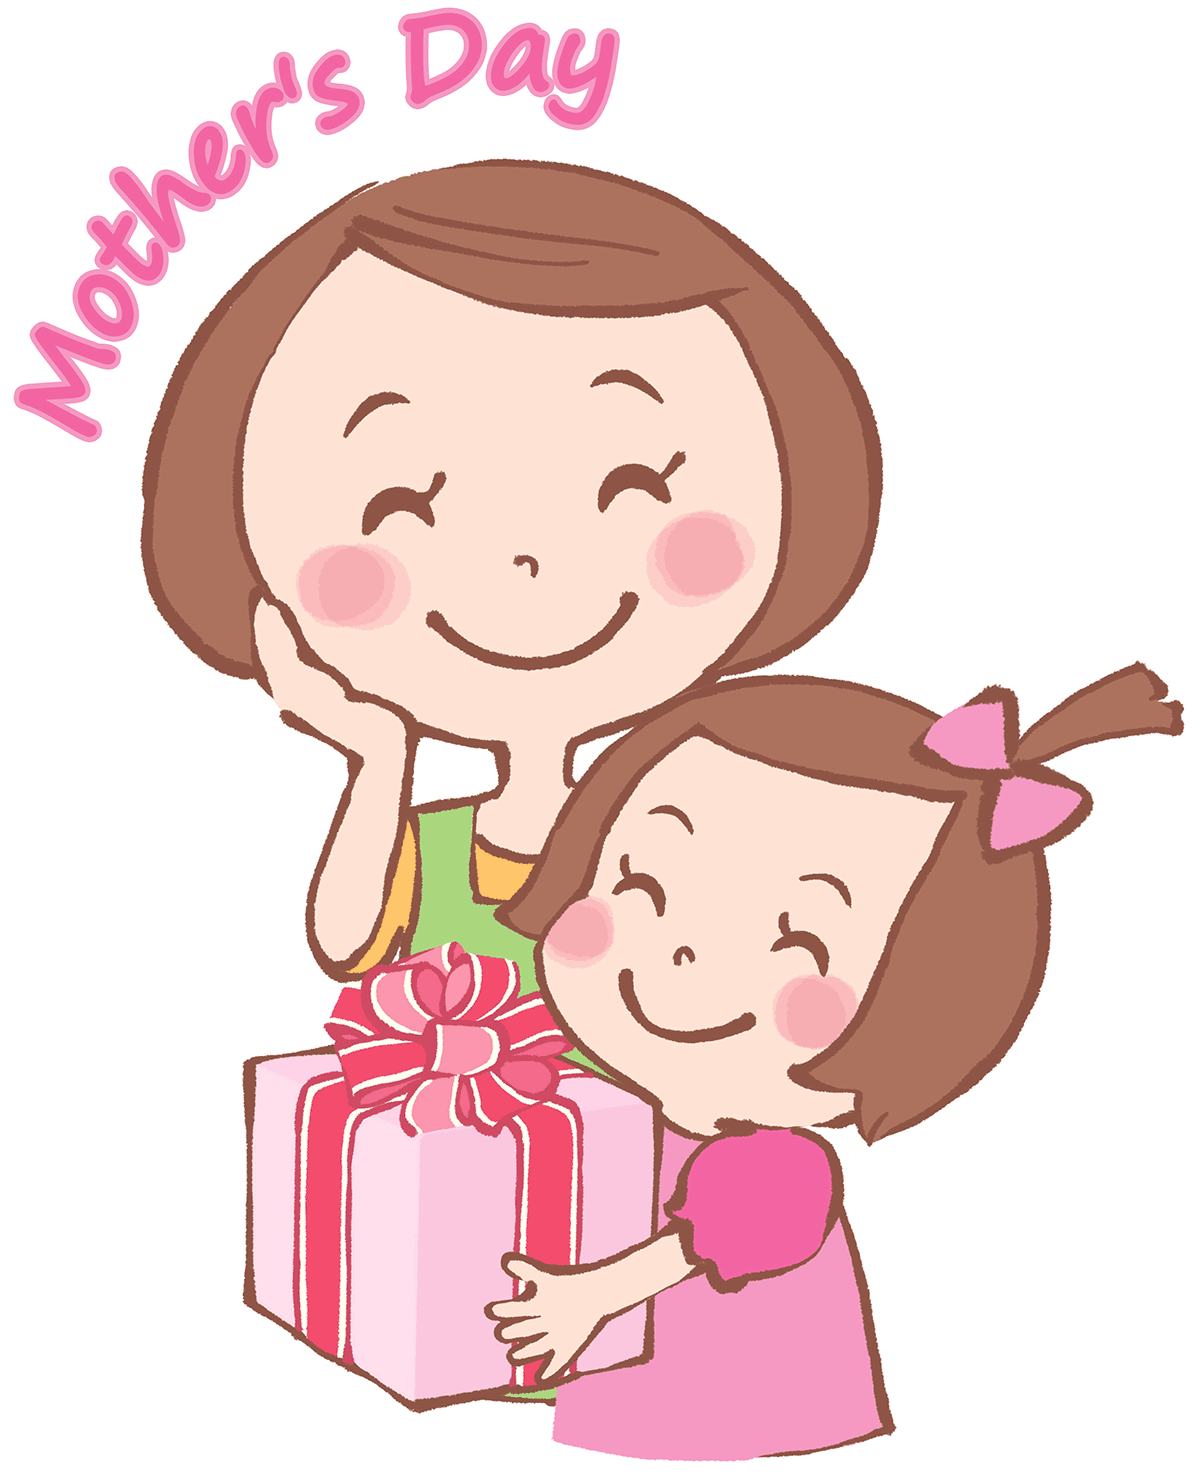 Daughter giving her mother a present on Mother's Day.